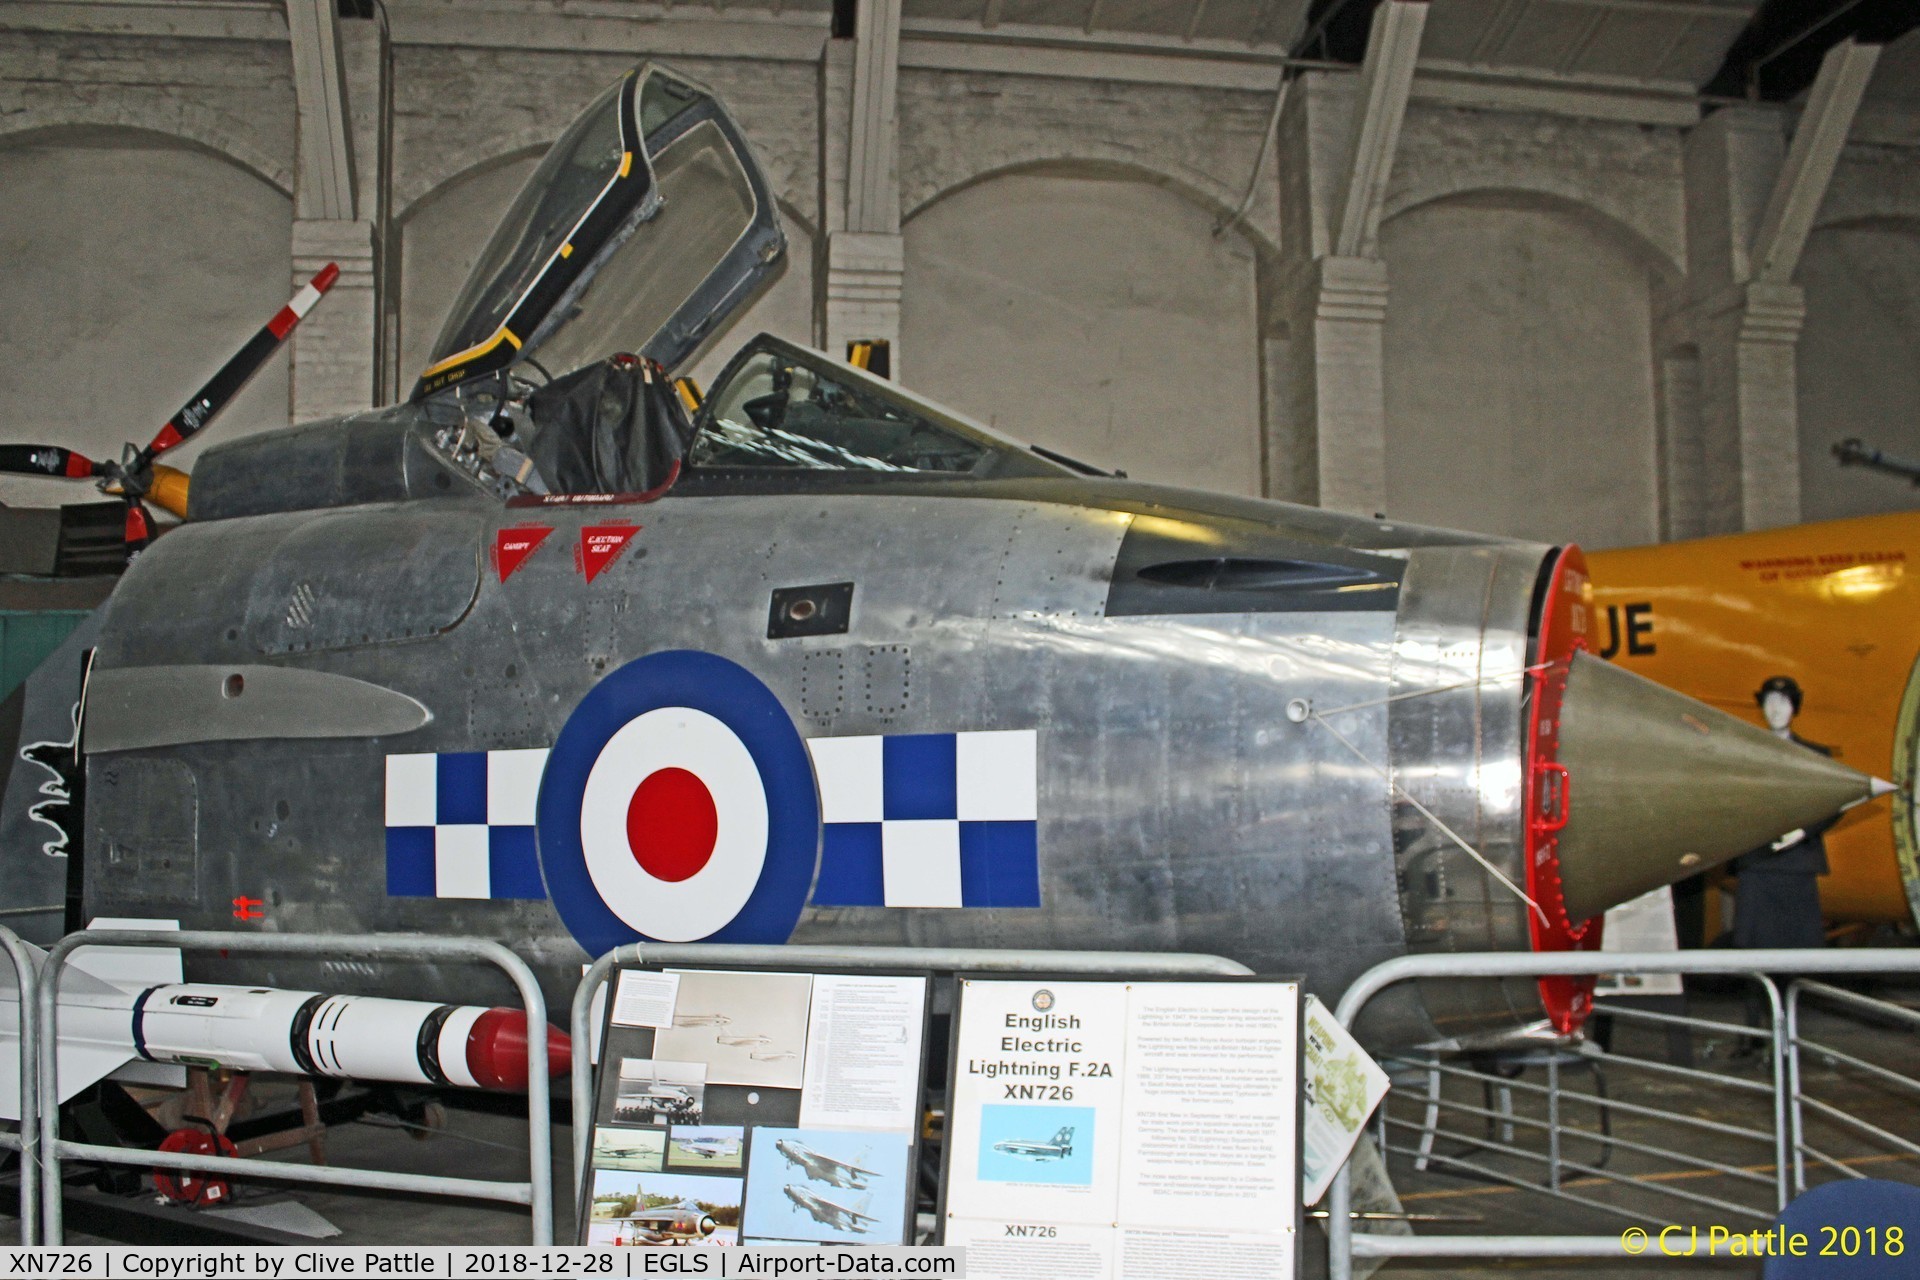 XN726, 1961 English Electric Lightning F.2A C/N 95098, Cockpit - on display at the Boscombe Down Aviation Collection (BDAC) at Old Sarum Airfield , EGLS.